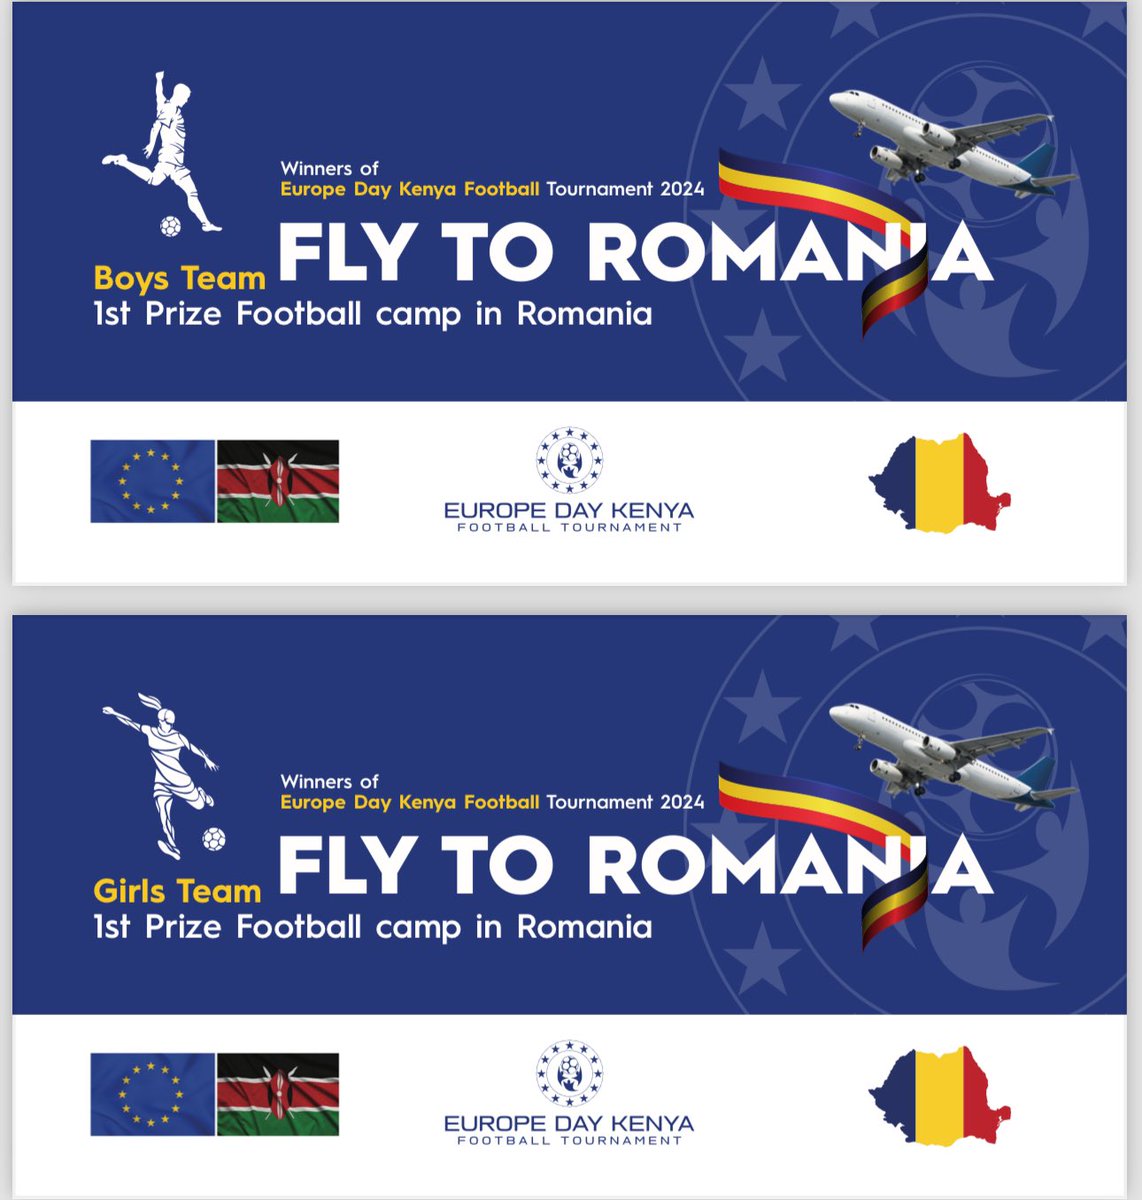 📣 Join us live for the Europe Day Football Tournament in Kenya! 🏆⚽ Watch the boys' and girls' teams compete for the championship titles. 🇷🇴 Romania is proud to sponsor the prizes! 🏅 🔗 Live Stream: [youtube.com/live/BFYIFfrPe…) #EuropeDay #FootballTournament #Kenya #Romania